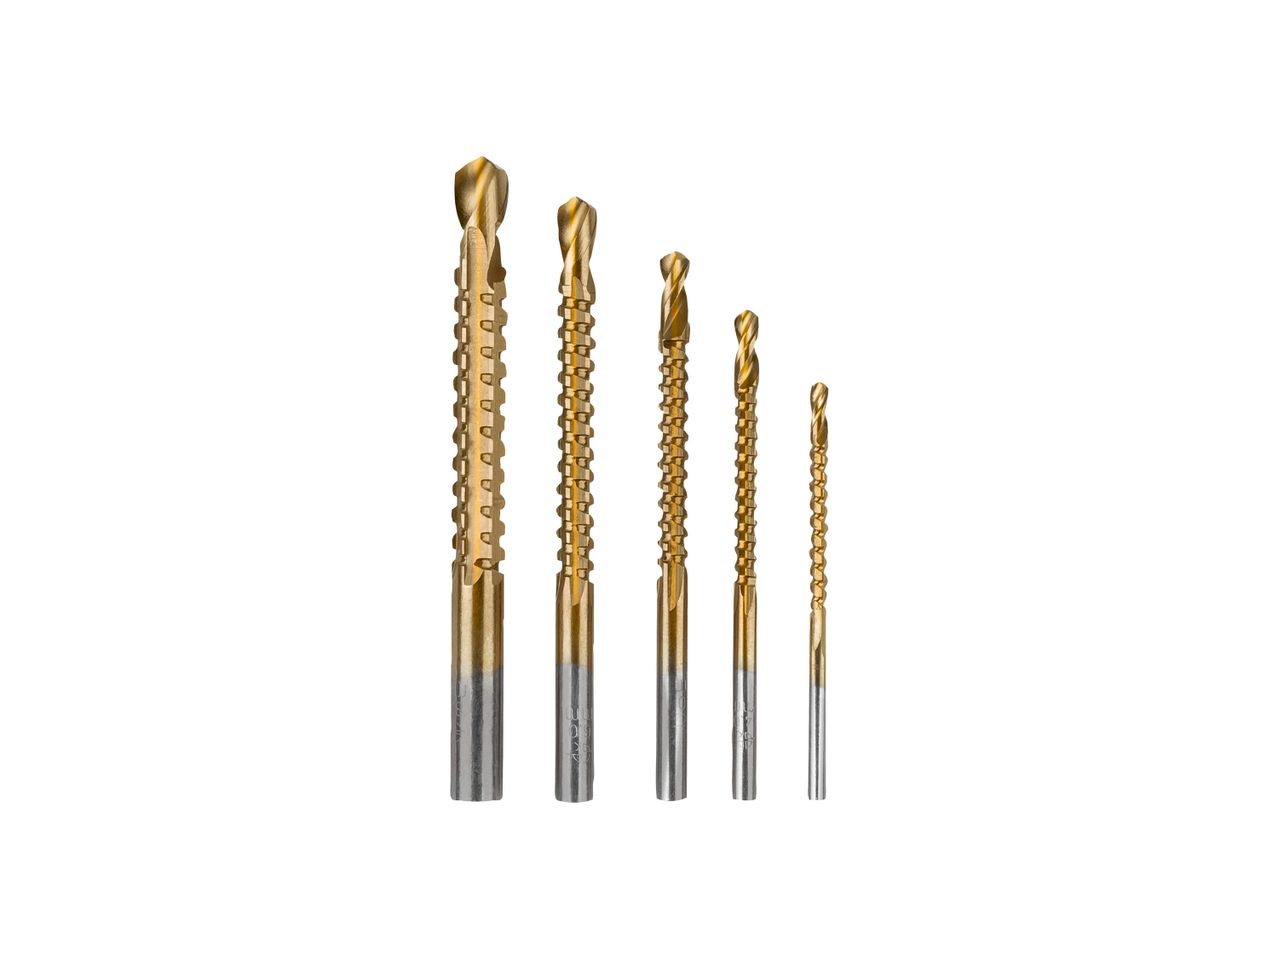 Go to full screen view: Drill Bit Set - Image 4